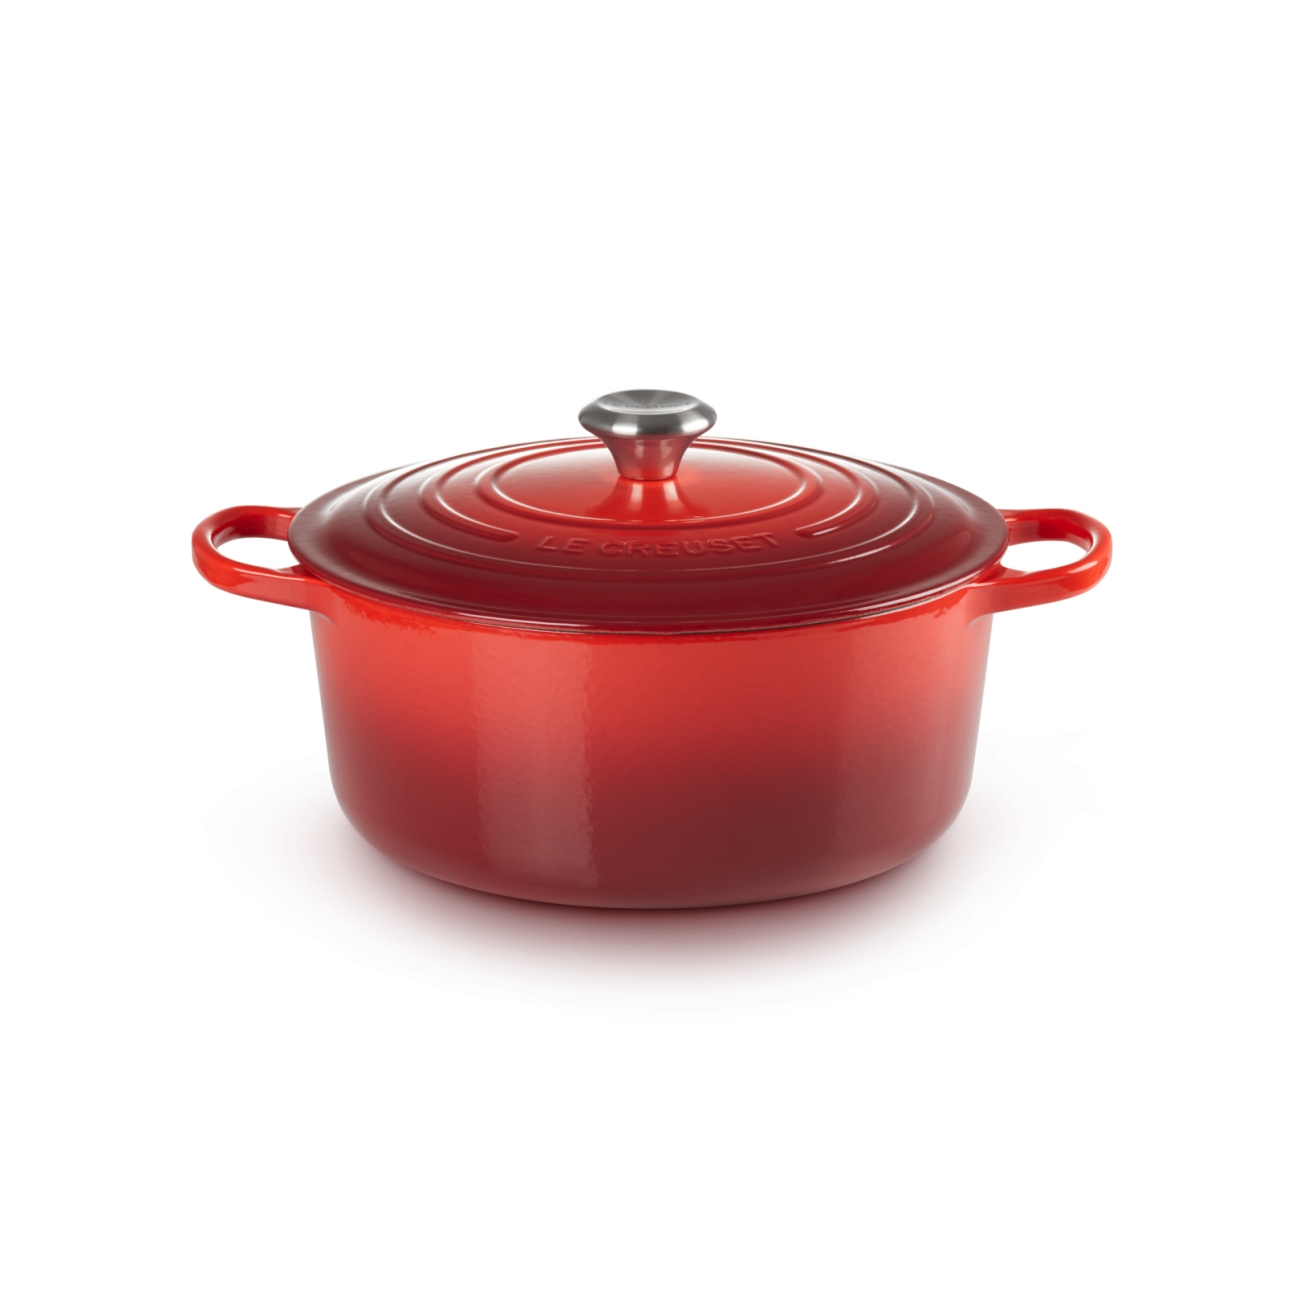 LE CREUSET Heart Shaped Cocotte Enamel Cast Iron Dutch Oven Red From Japan